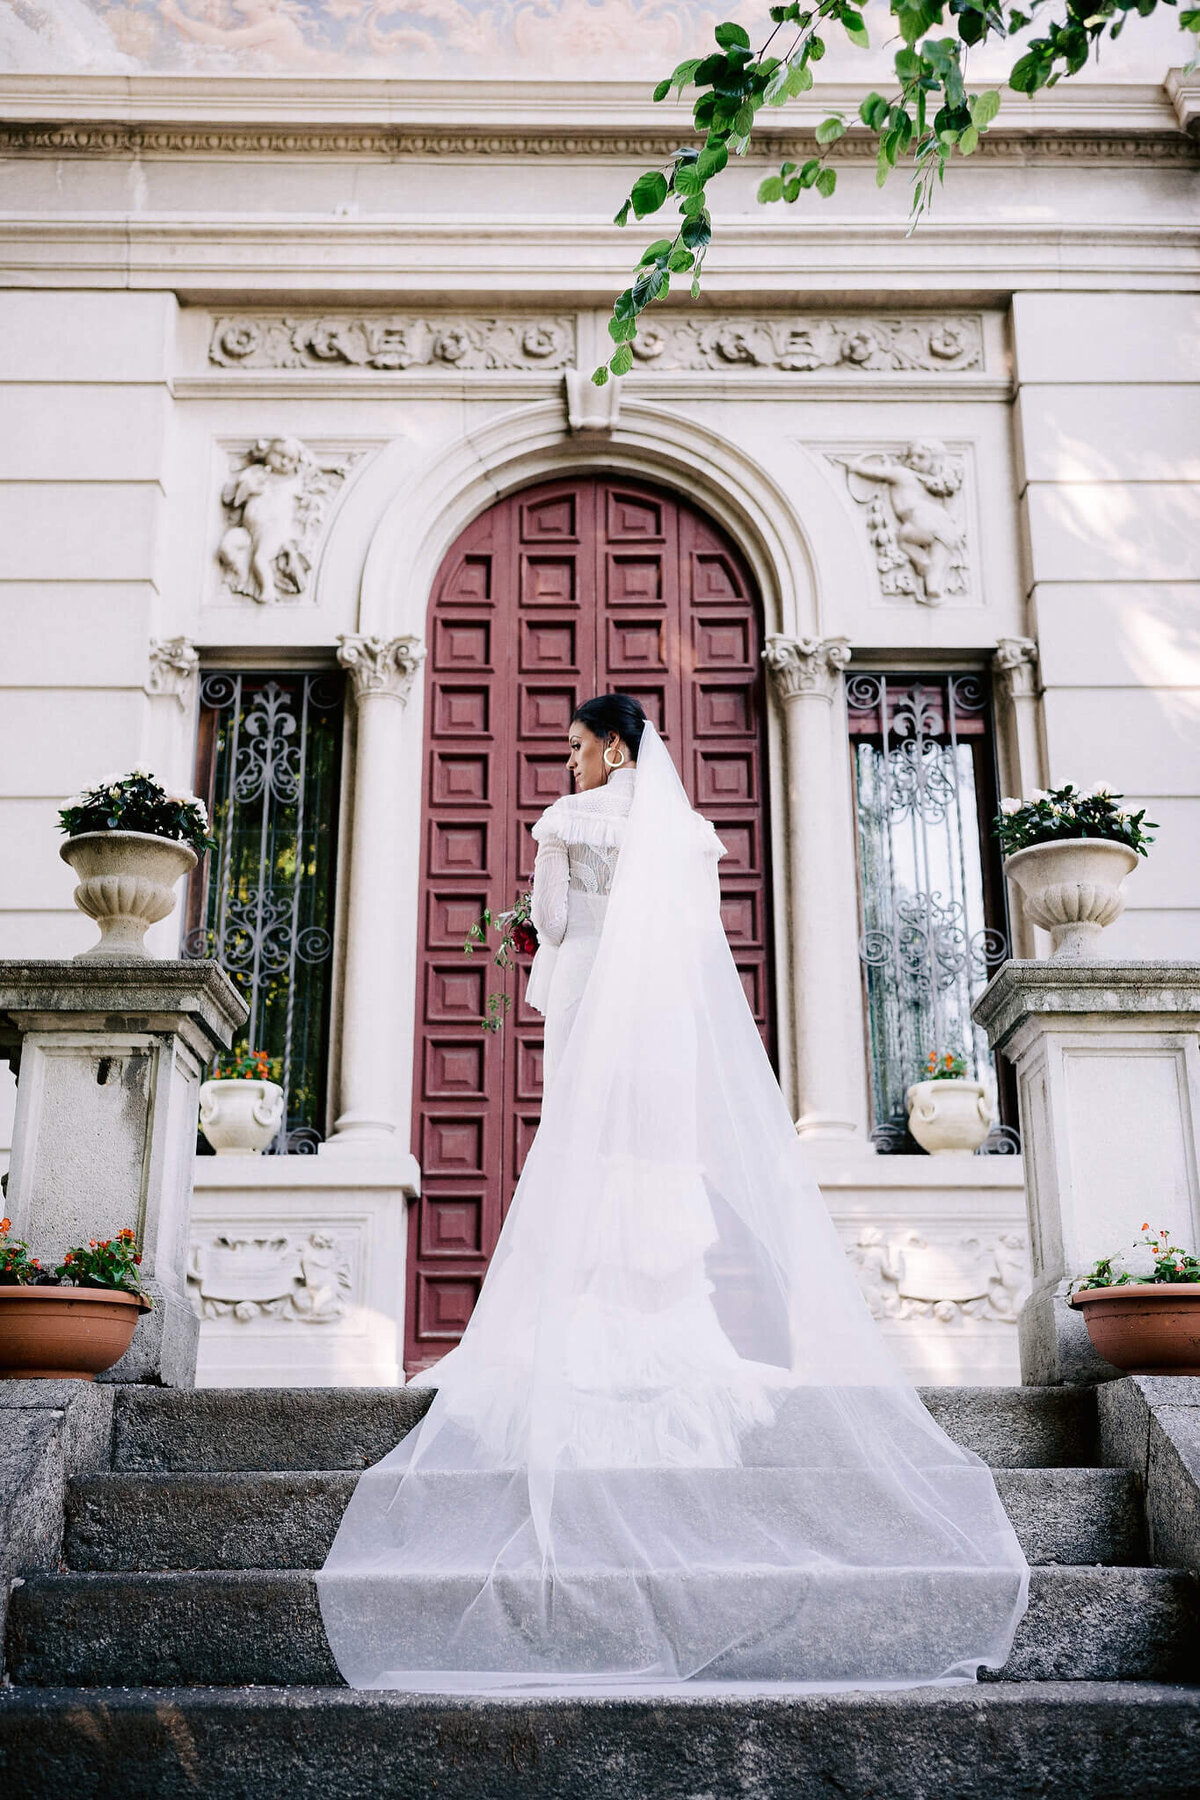 A bride on her back, standing on the top of the stairs, her long veil flowing down the stairs on a vintage villa background